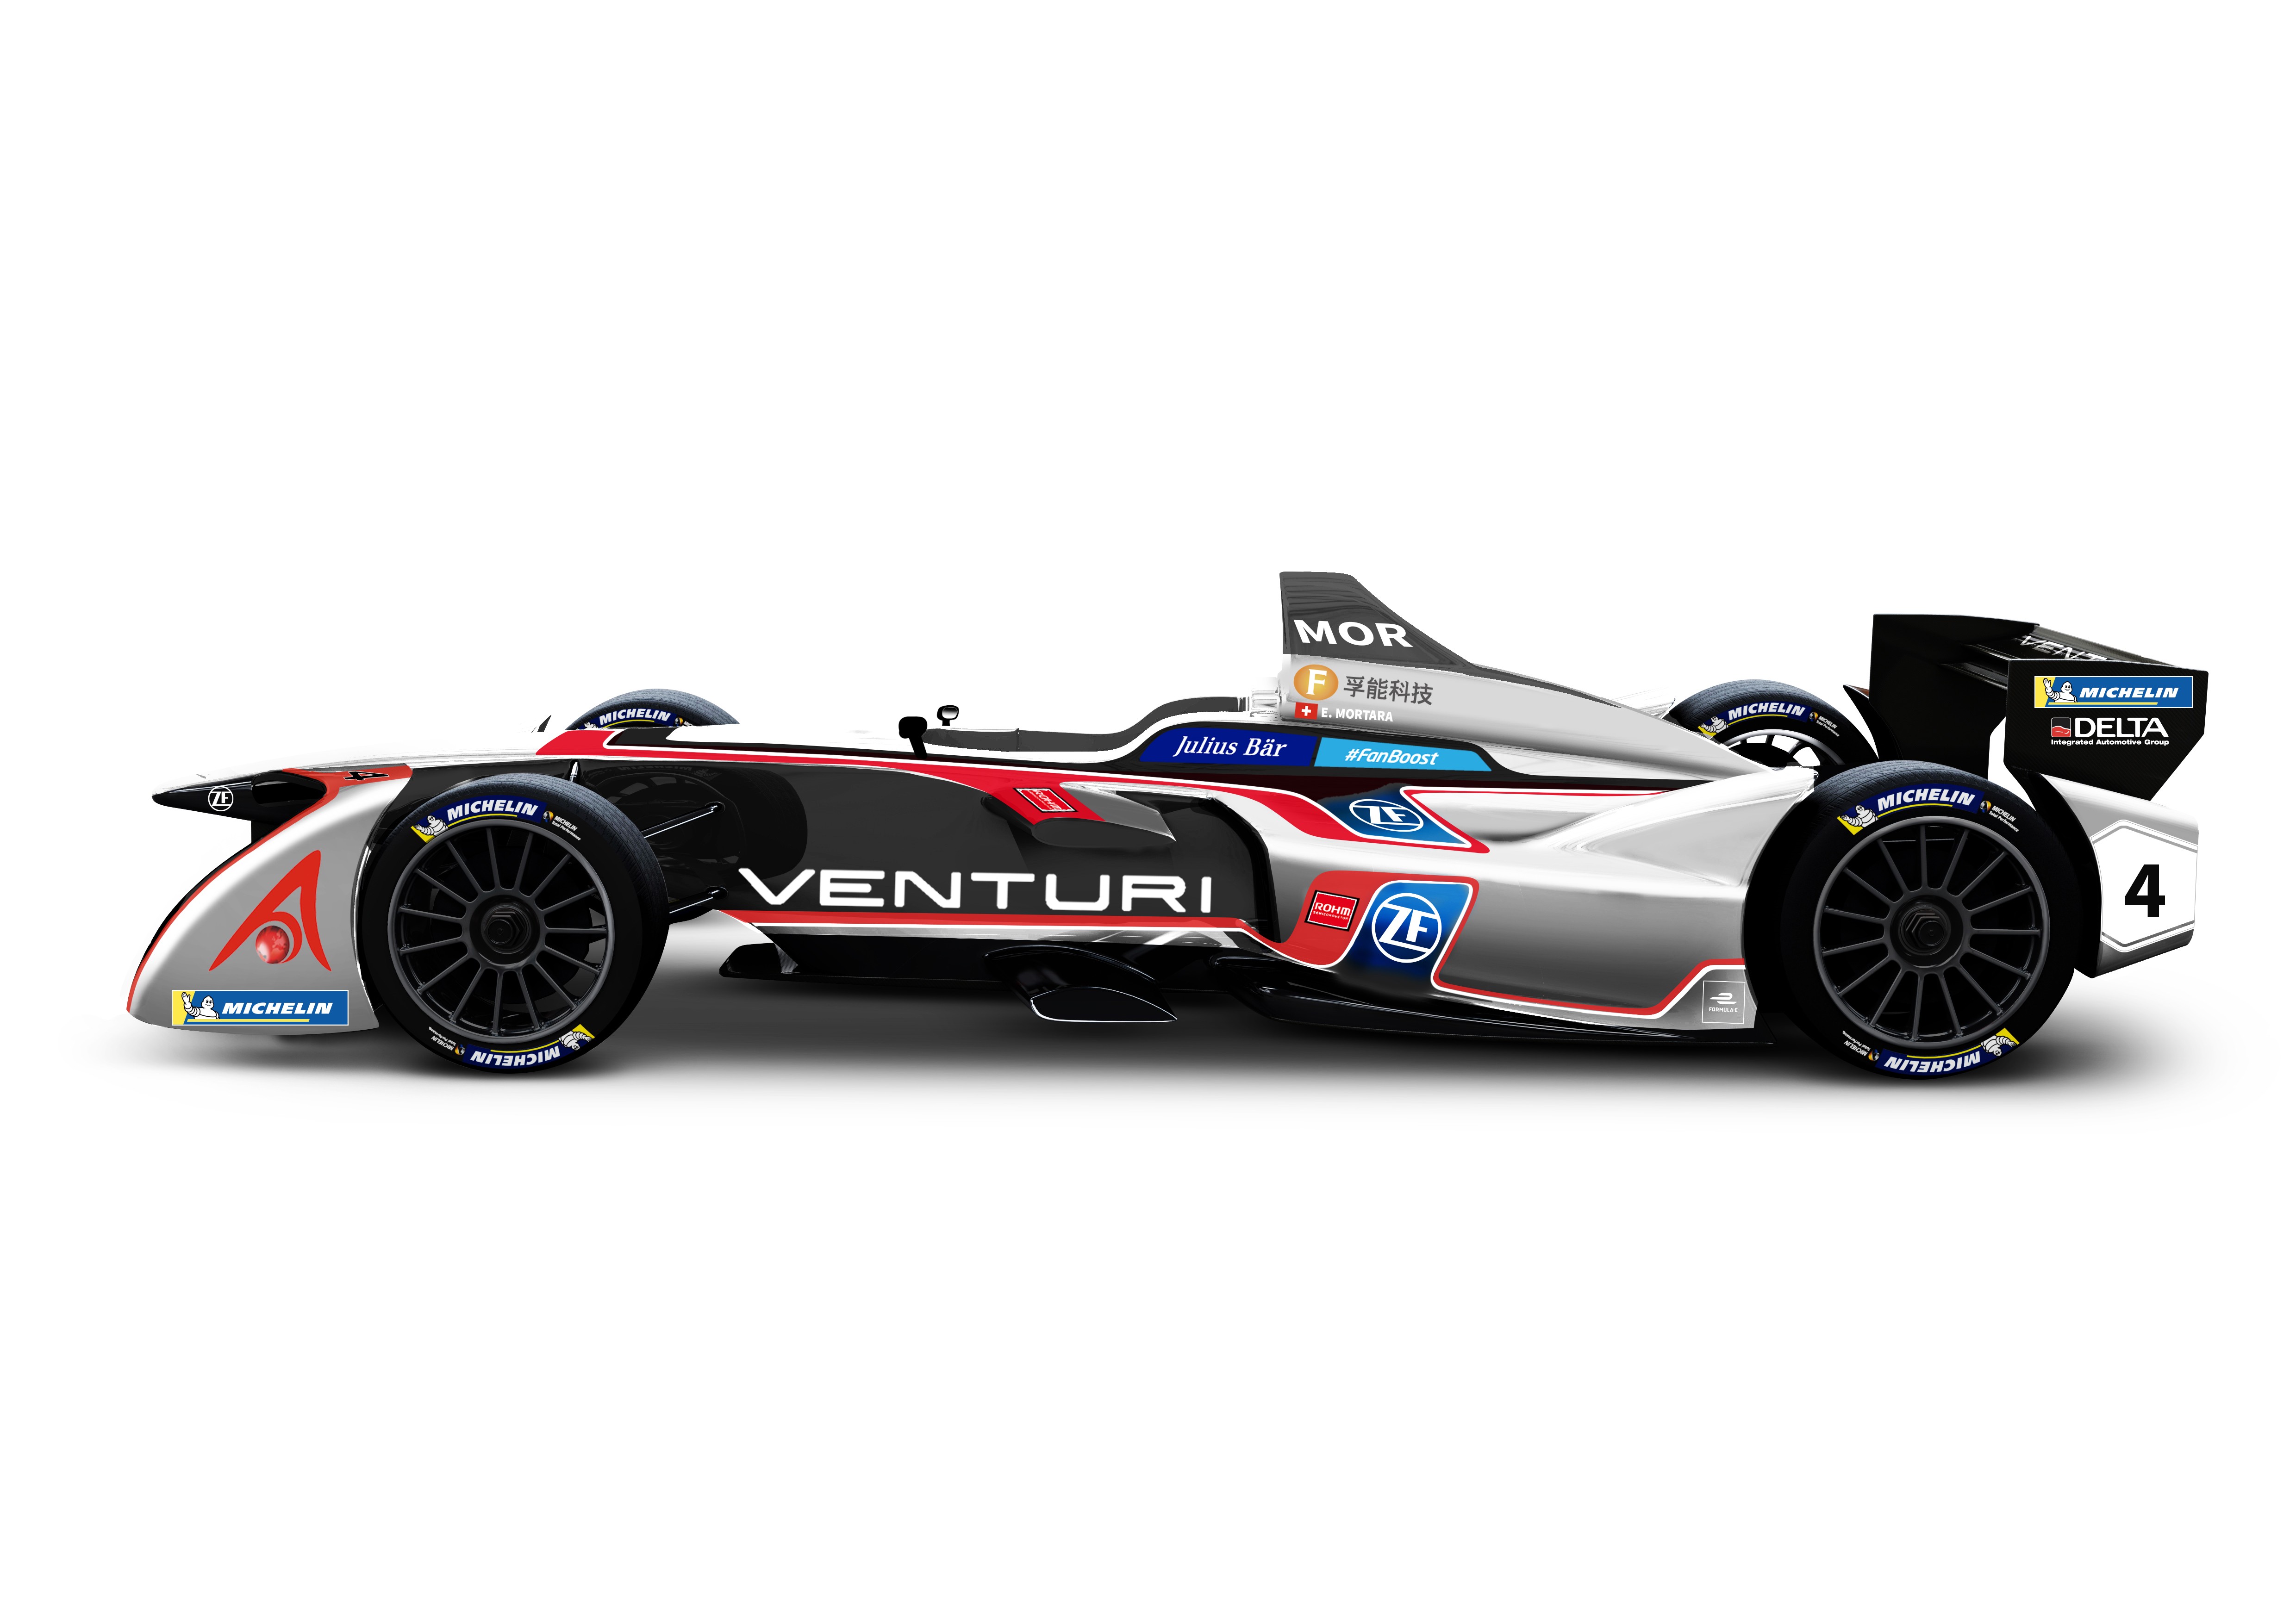 The Formula E Venturi VFE-05, which was built through a collaboration with Mercedes and can accelerate from 0 to 100km/h in 2.8 seconds, is for sale for US$300,000 from Friday at TheArsenale showroom at The Boulevard in Macau’s City of Dreams resort.